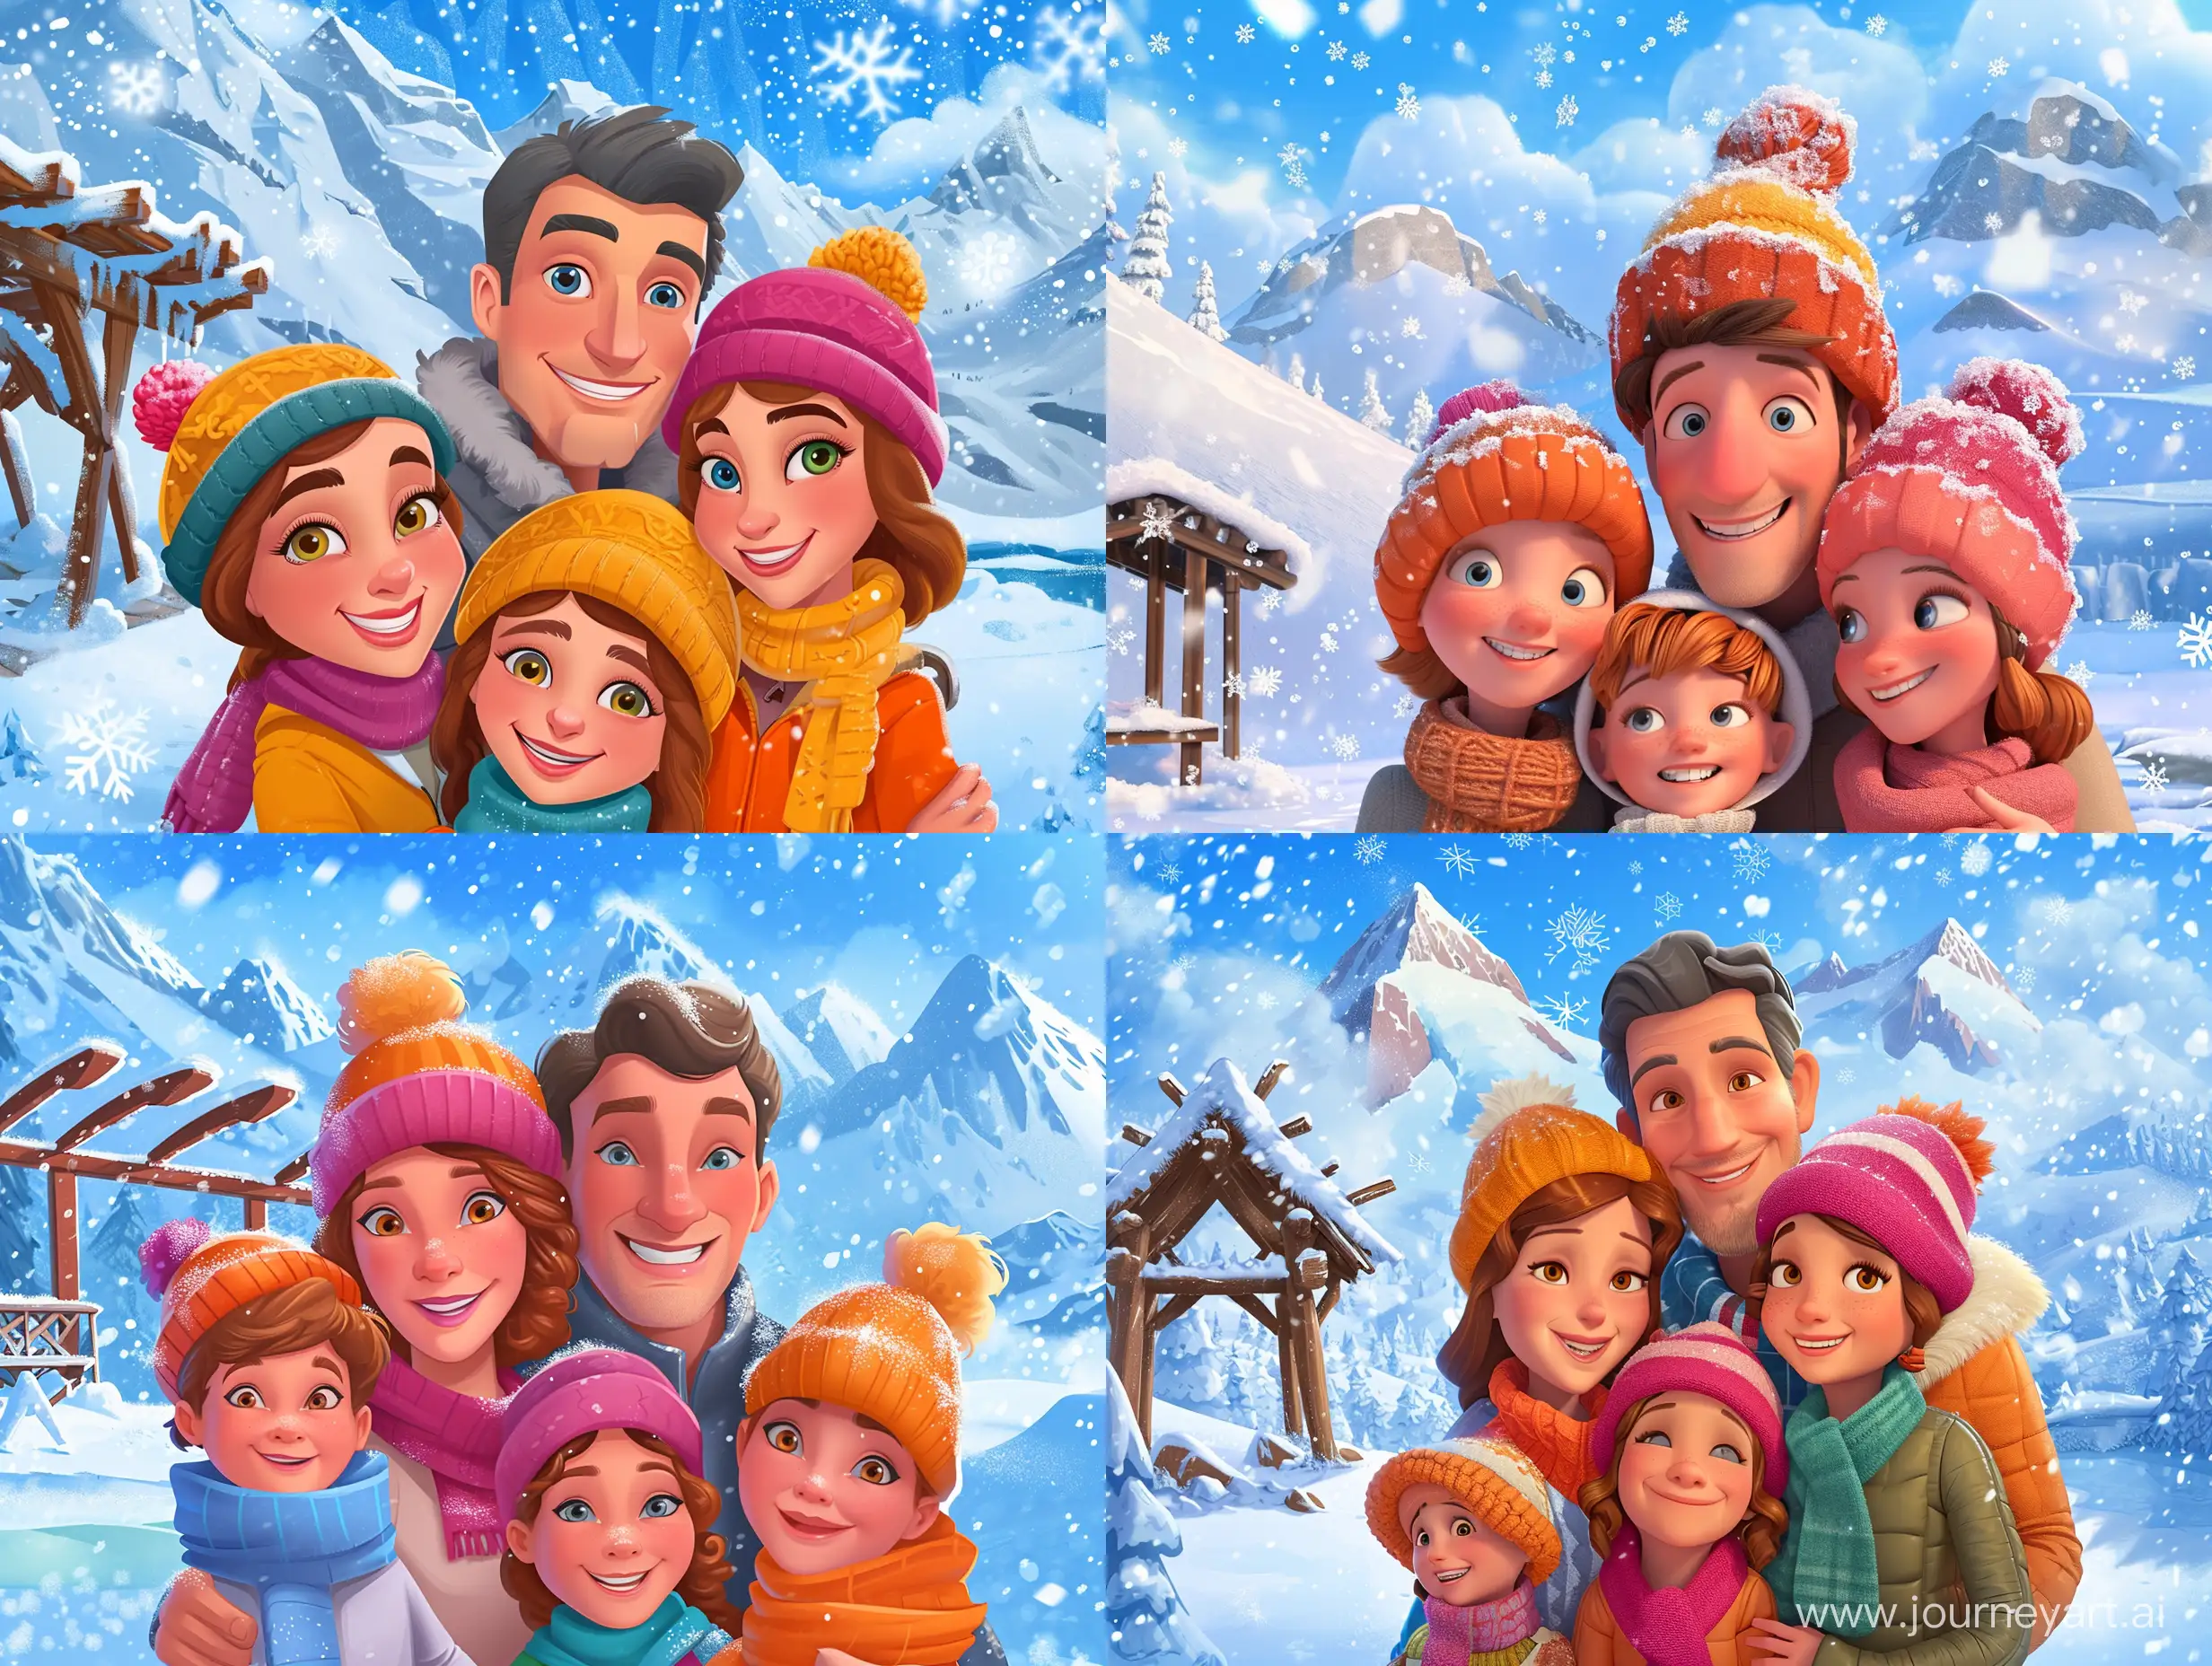 Cheerful-Family-Portrait-in-Snowy-Mountain-Setting